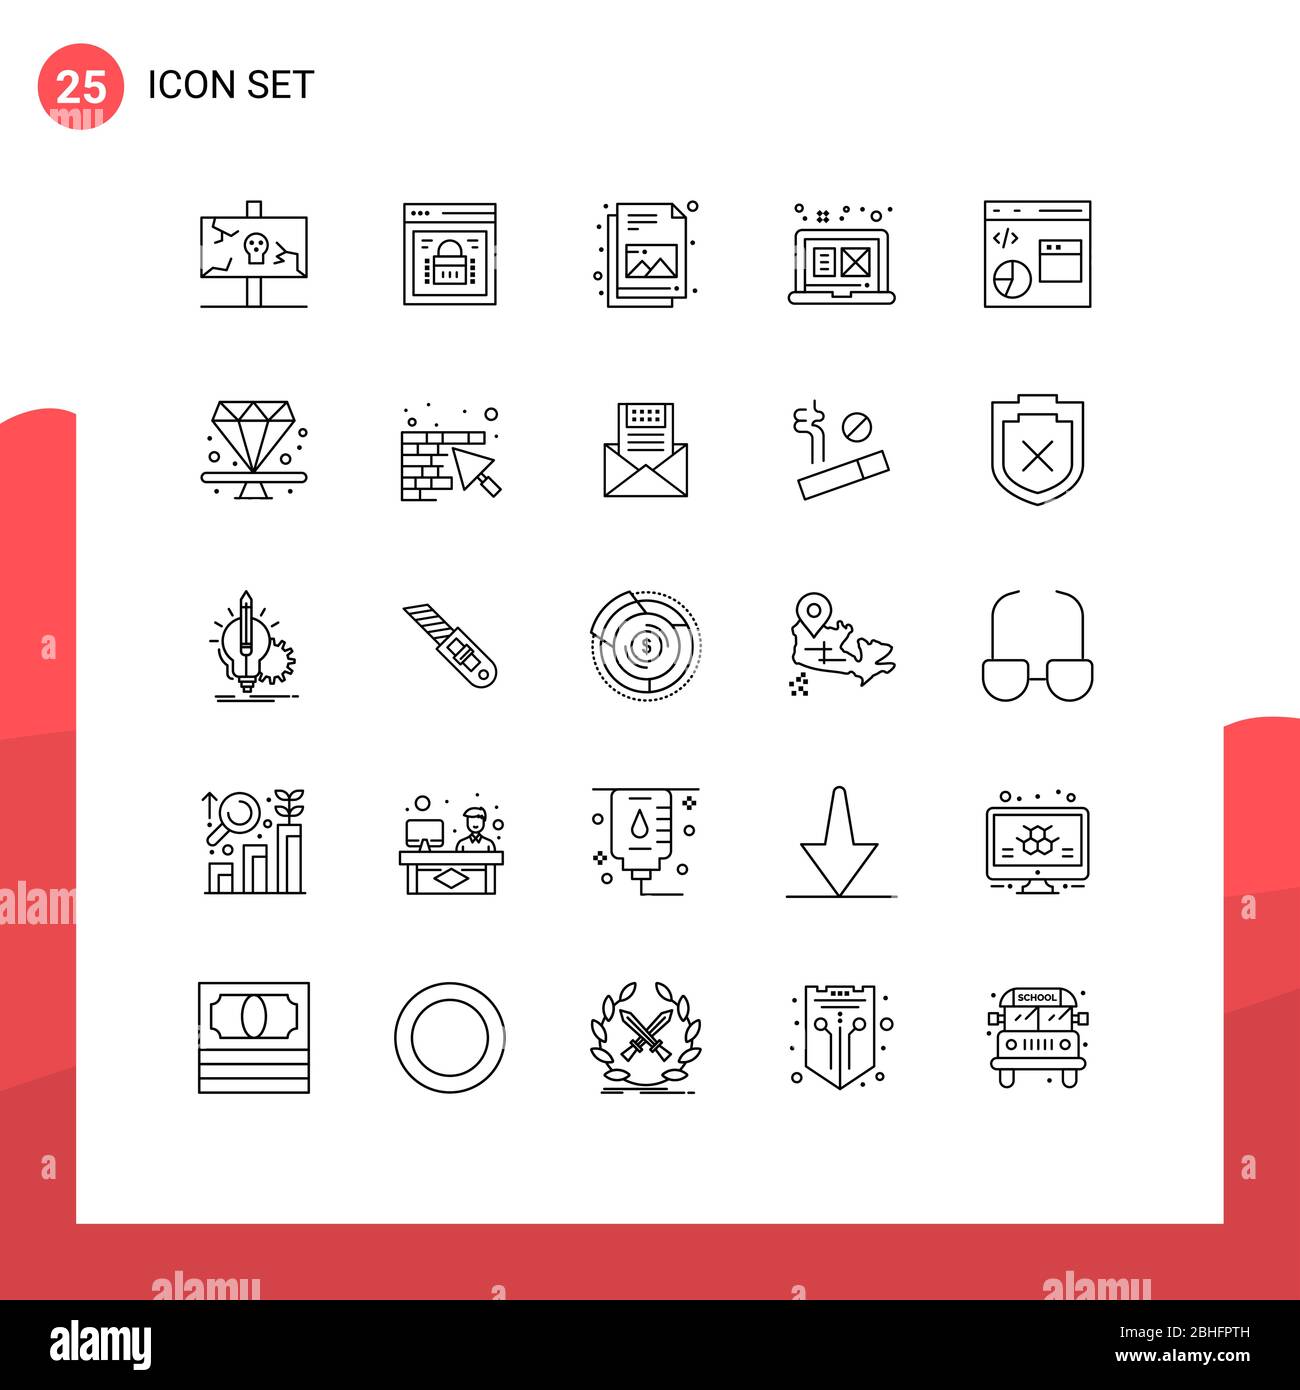 Universal Icon Symbols Group of 25 Modern Lines of coding, graphic, web lock, digital graphic, picture Editable Vector Design Elements Stock Vector